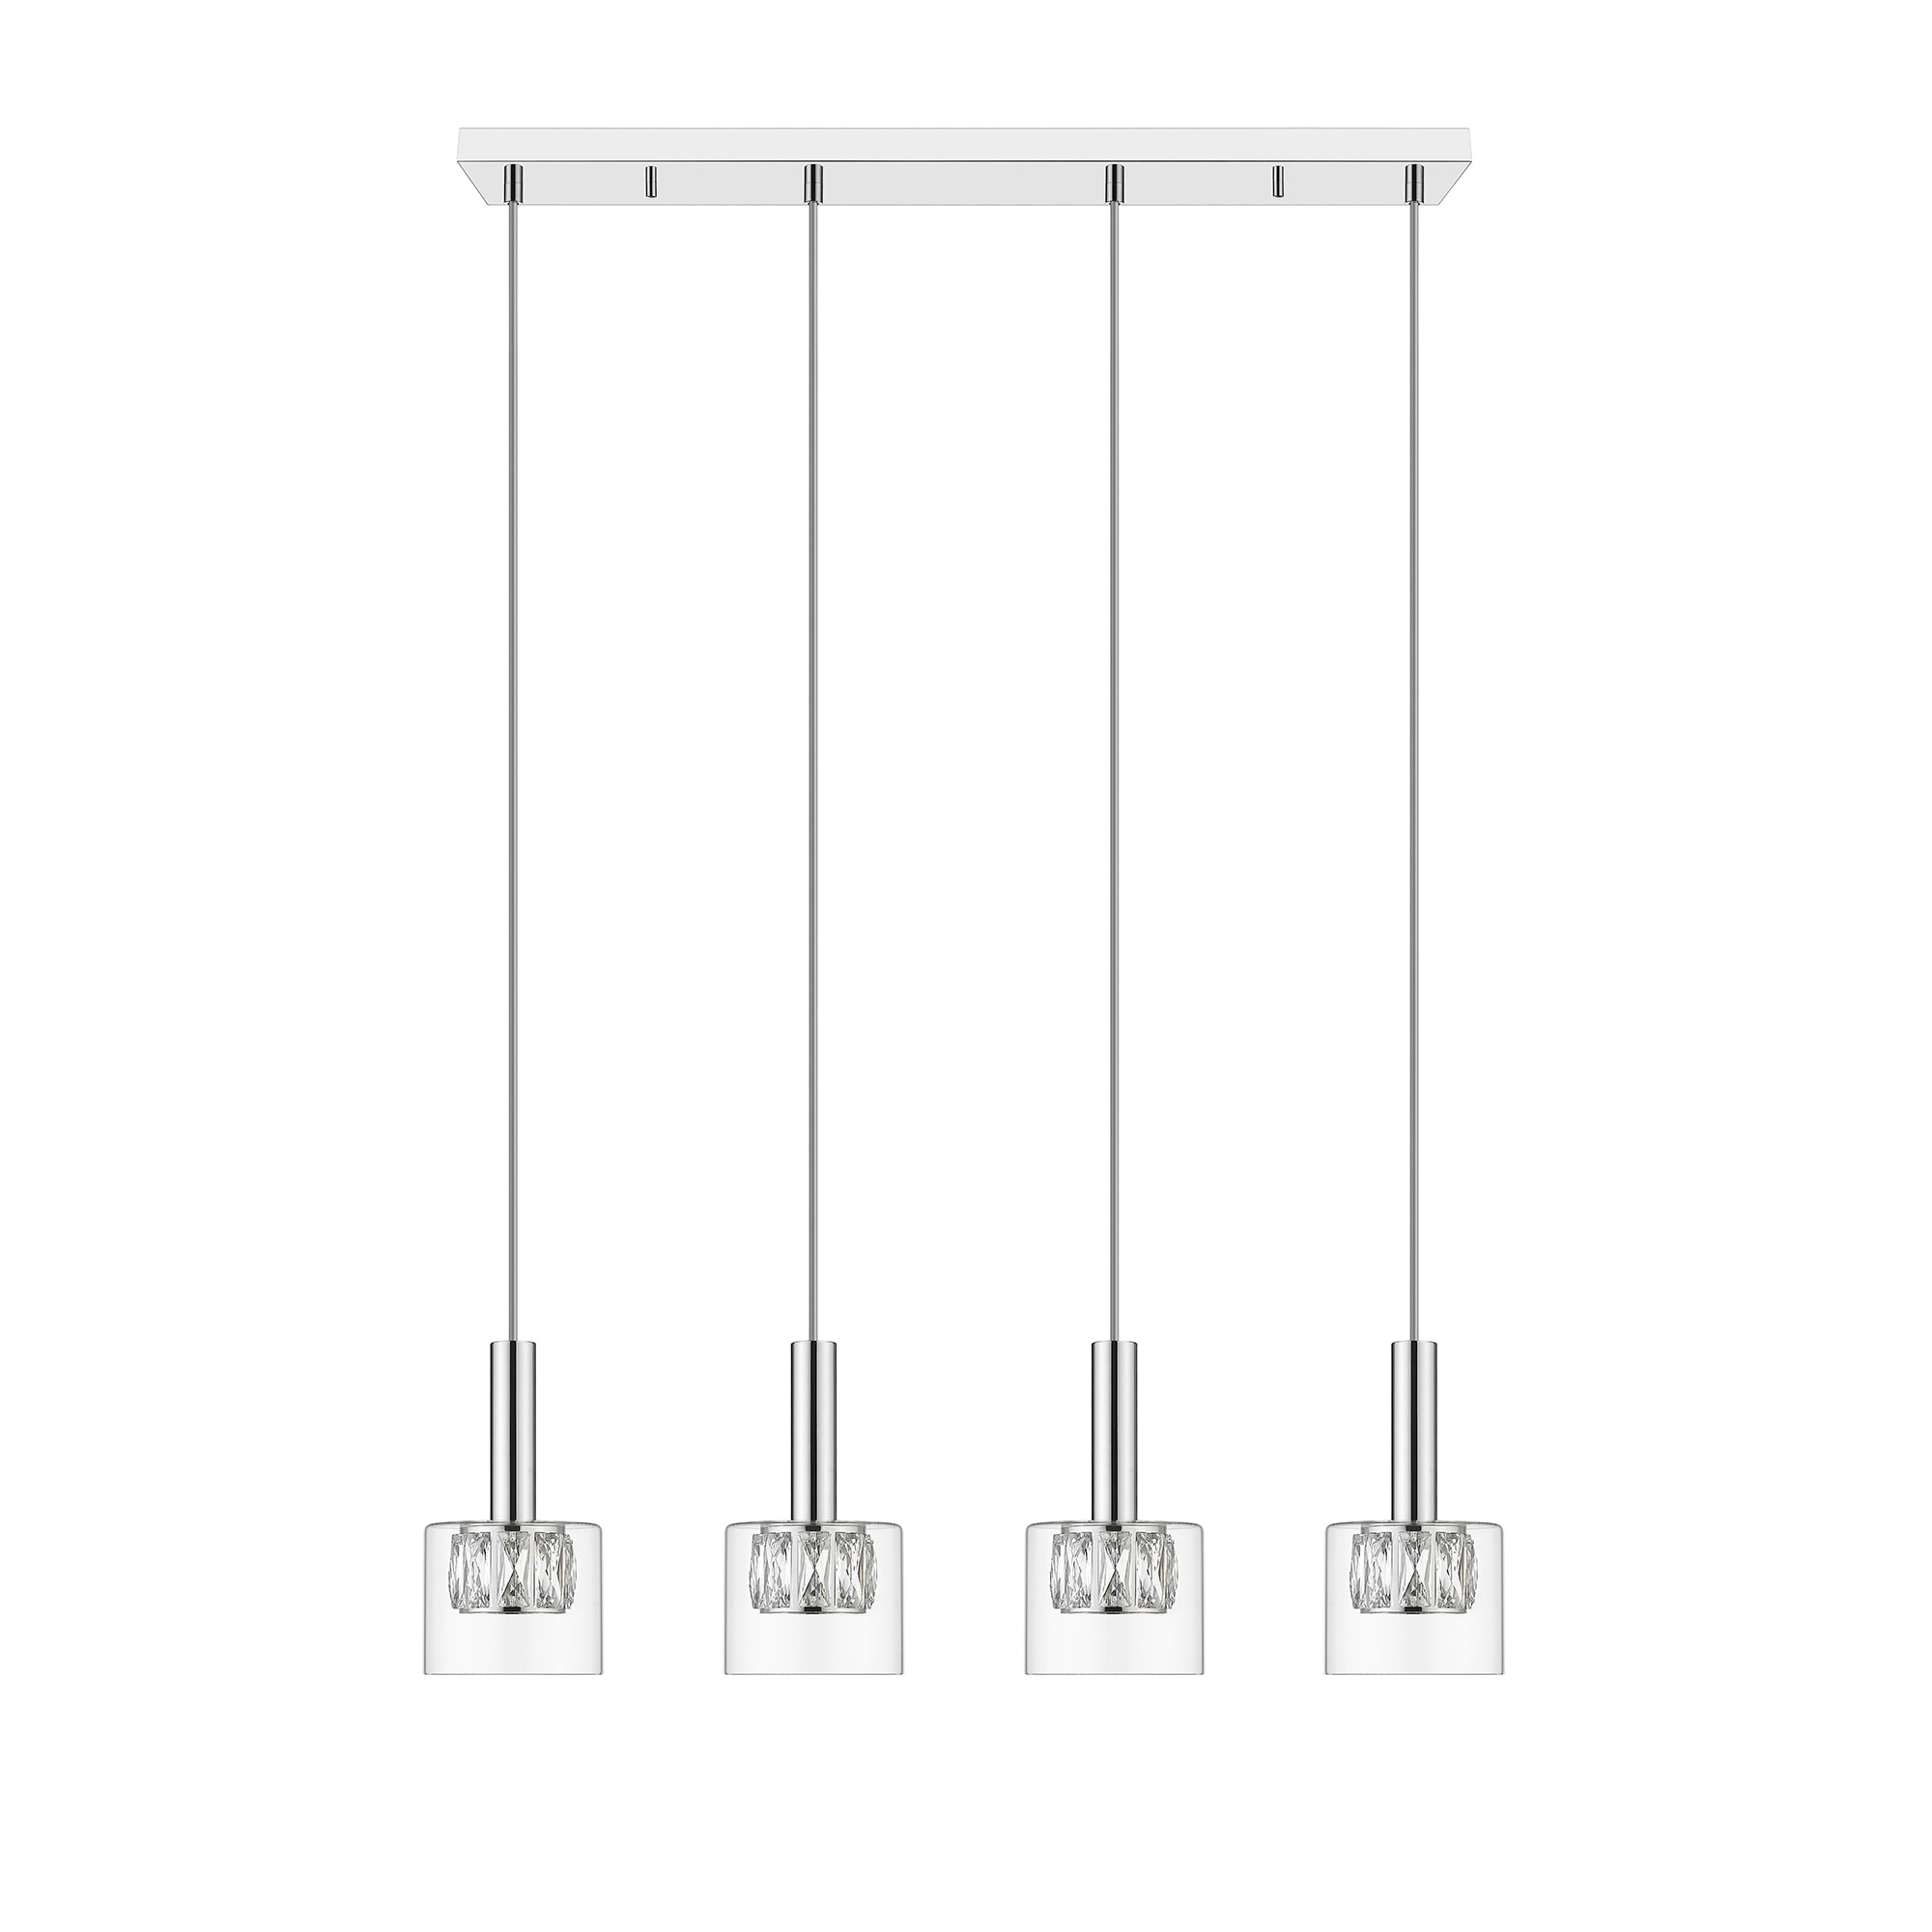 OVE Decors Cider IV LED Integrated Pendant with Mirror finish 8.69 in H  Bed Bath  Beyond 30925638